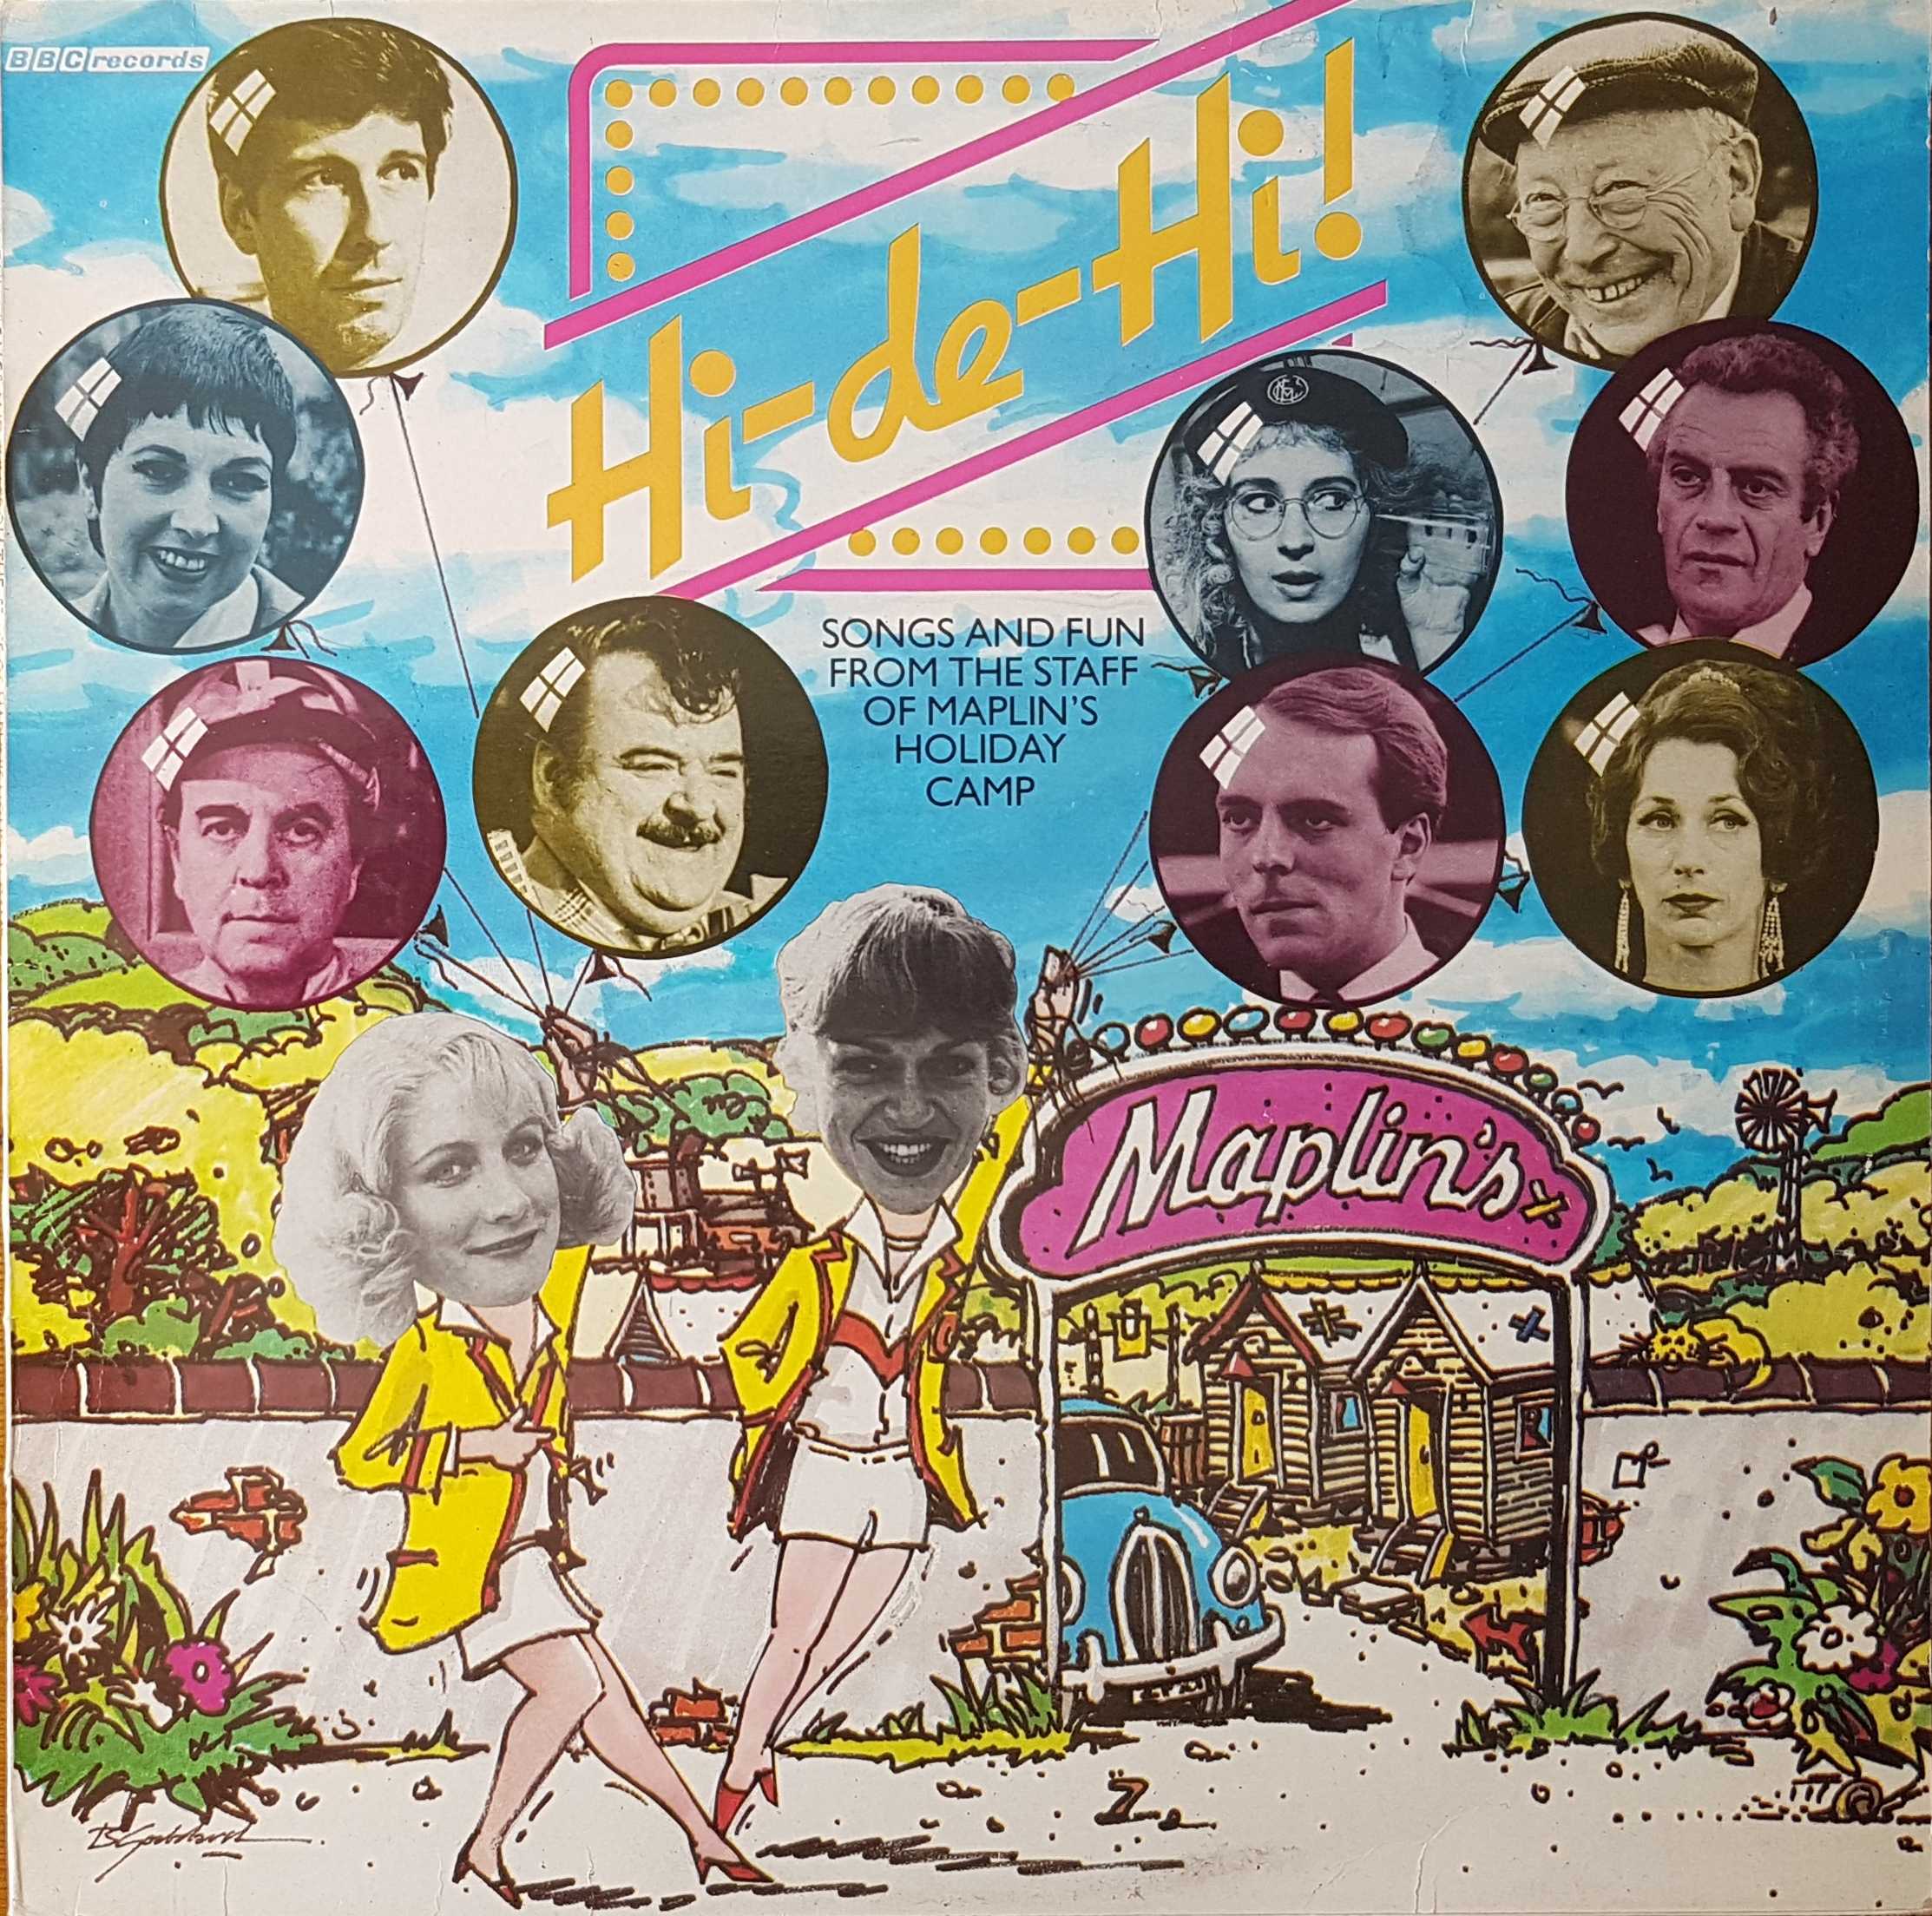 Picture of REC 436 Hi - de - hi by artist Various from the BBC albums - Records and Tapes library